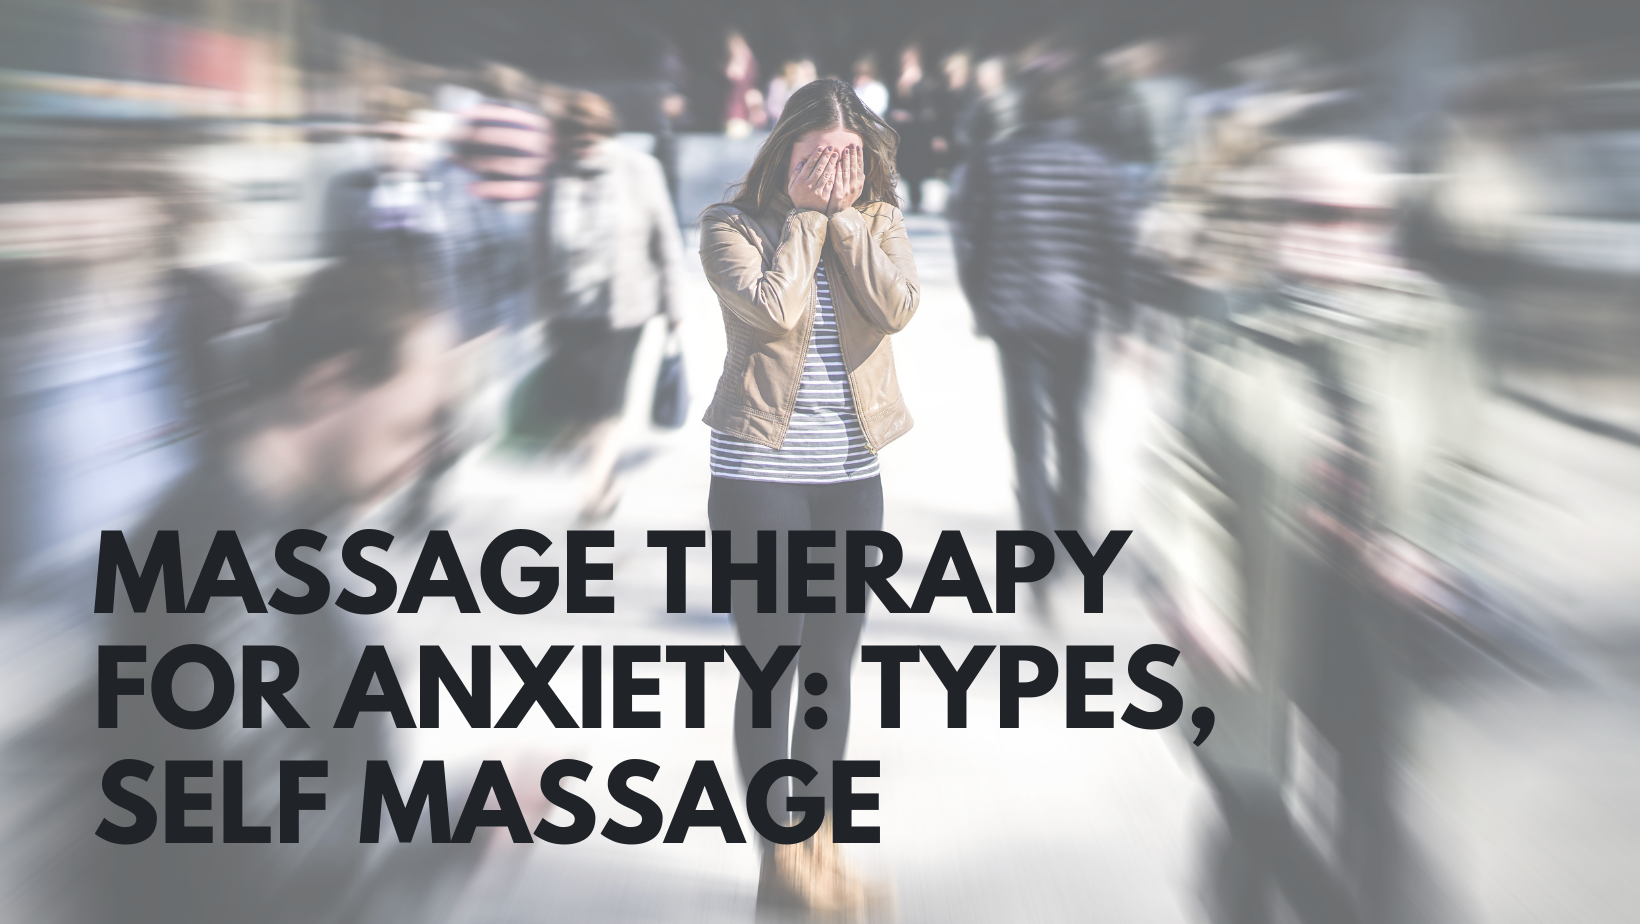 Massage Therapy for Anxiety Types, Self Massage